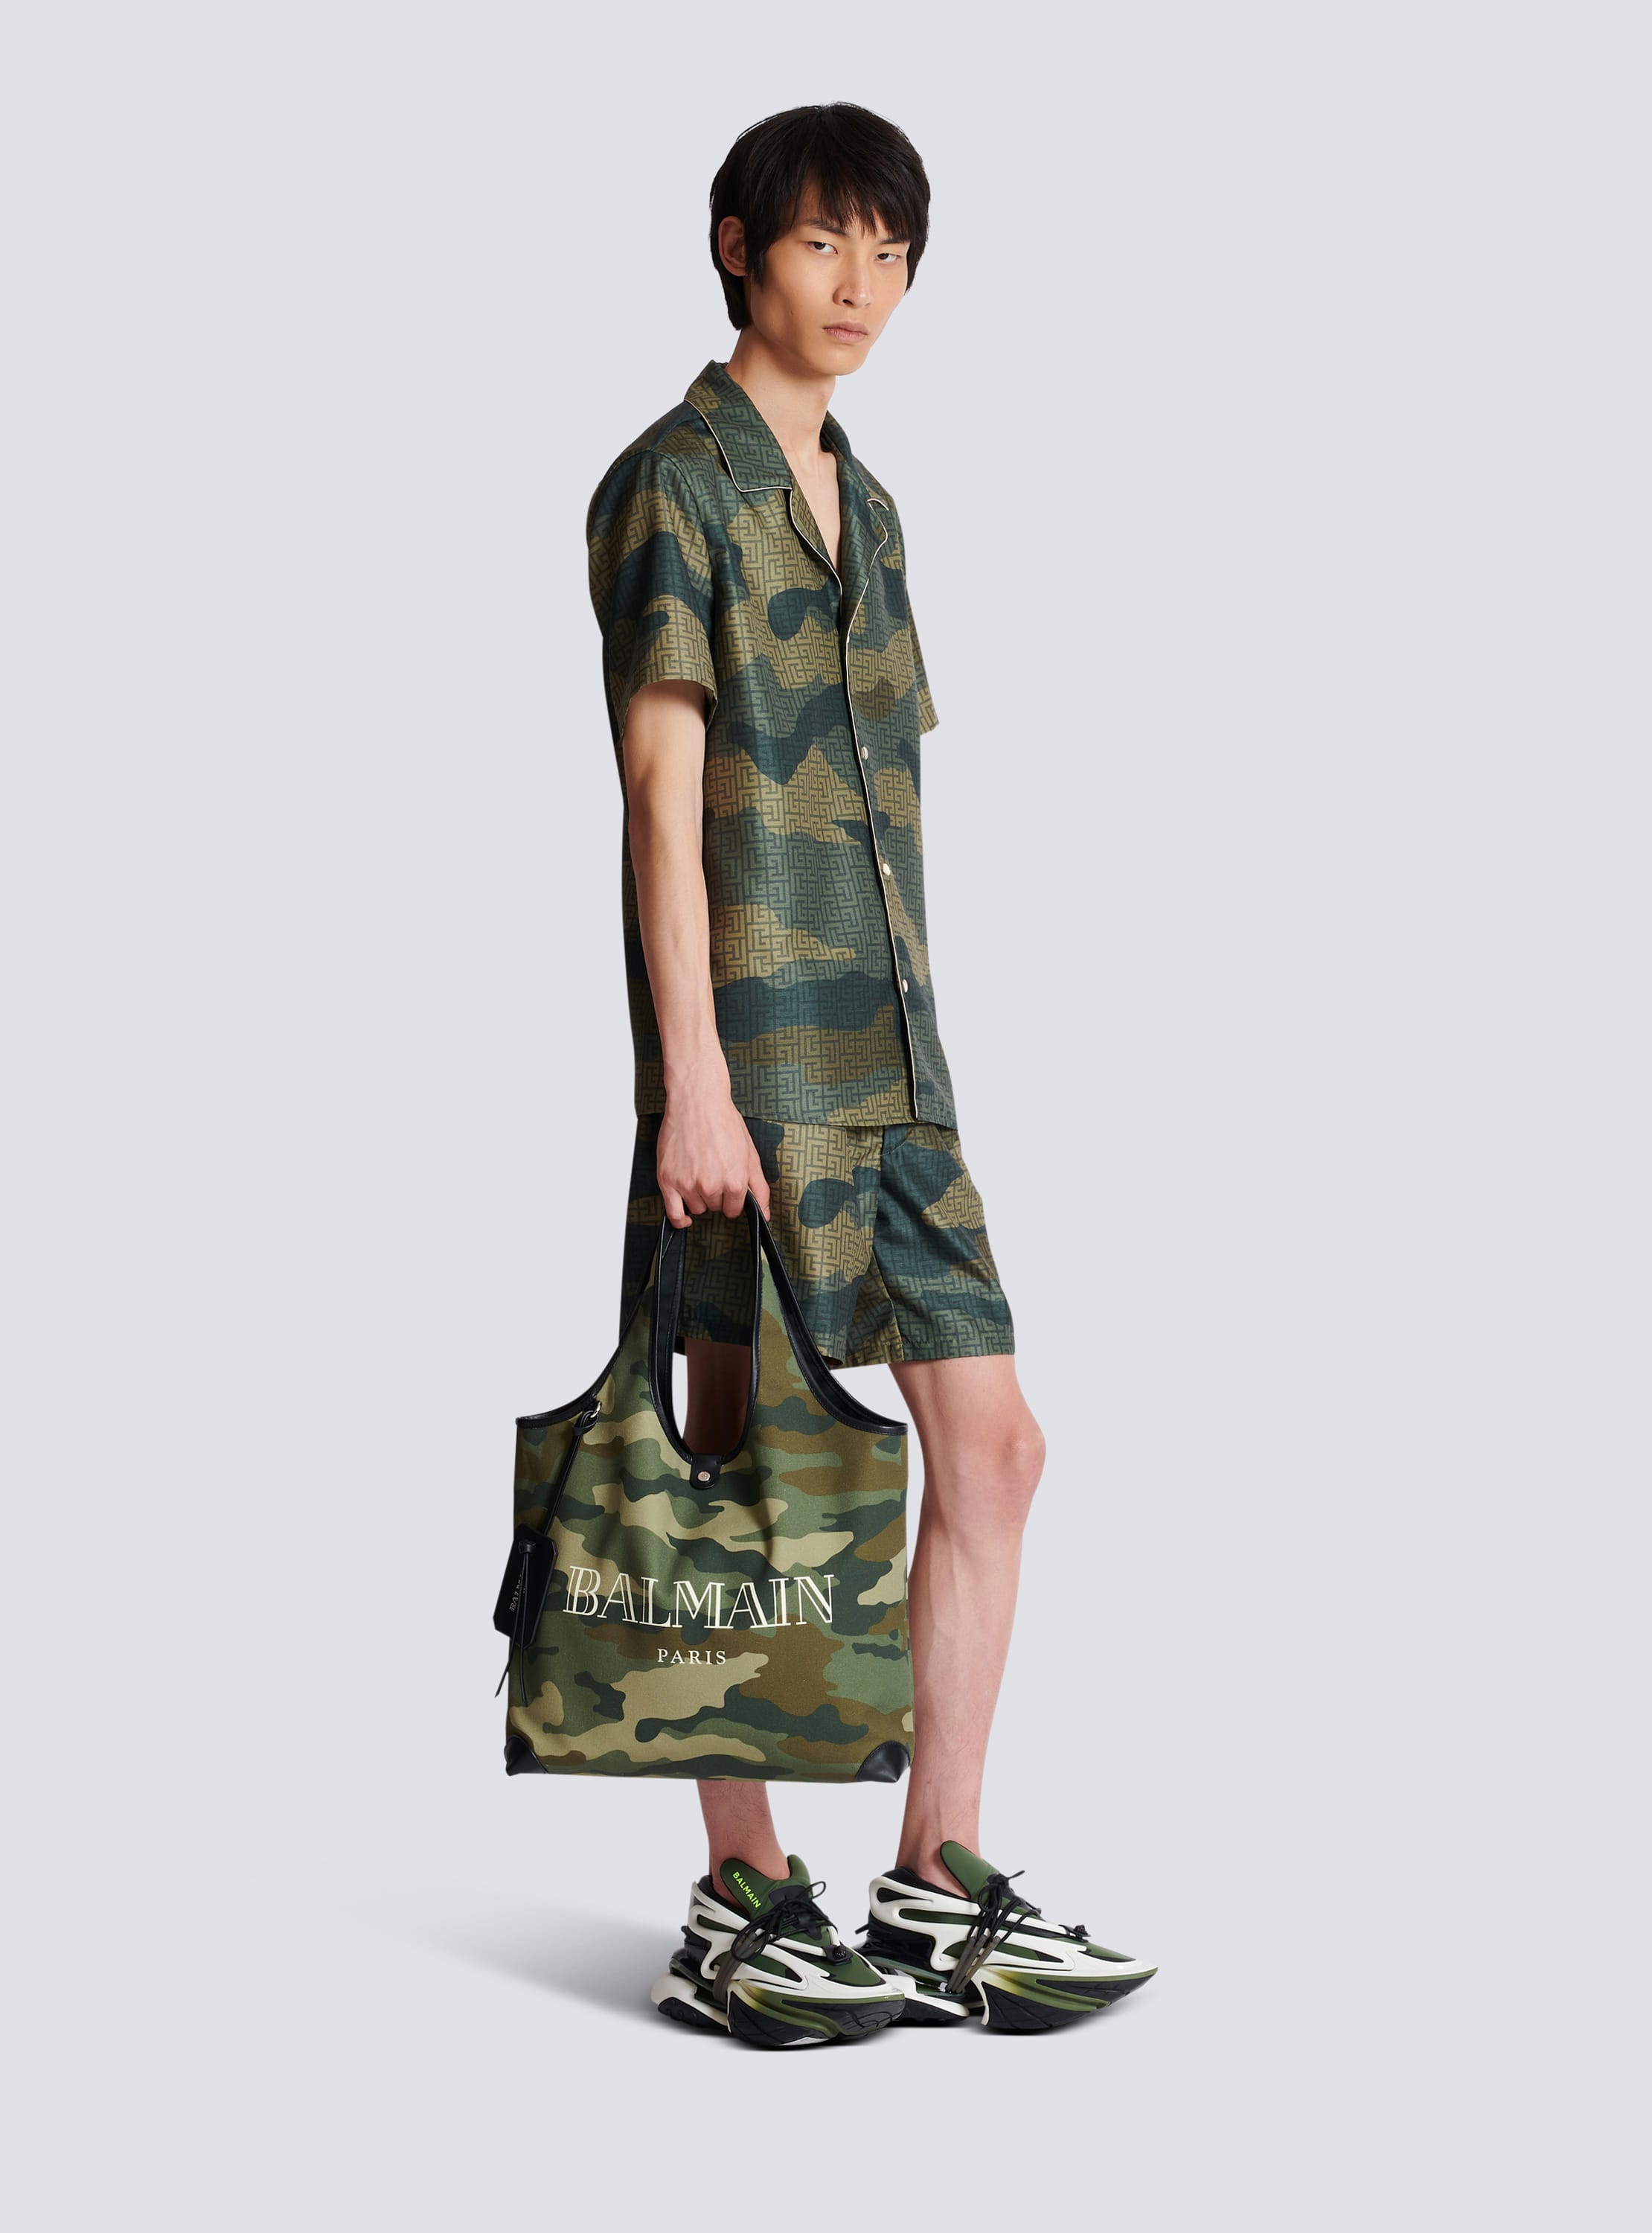 Grocery Bag B-Army in tela con stampa camouflage Balmain Vintage